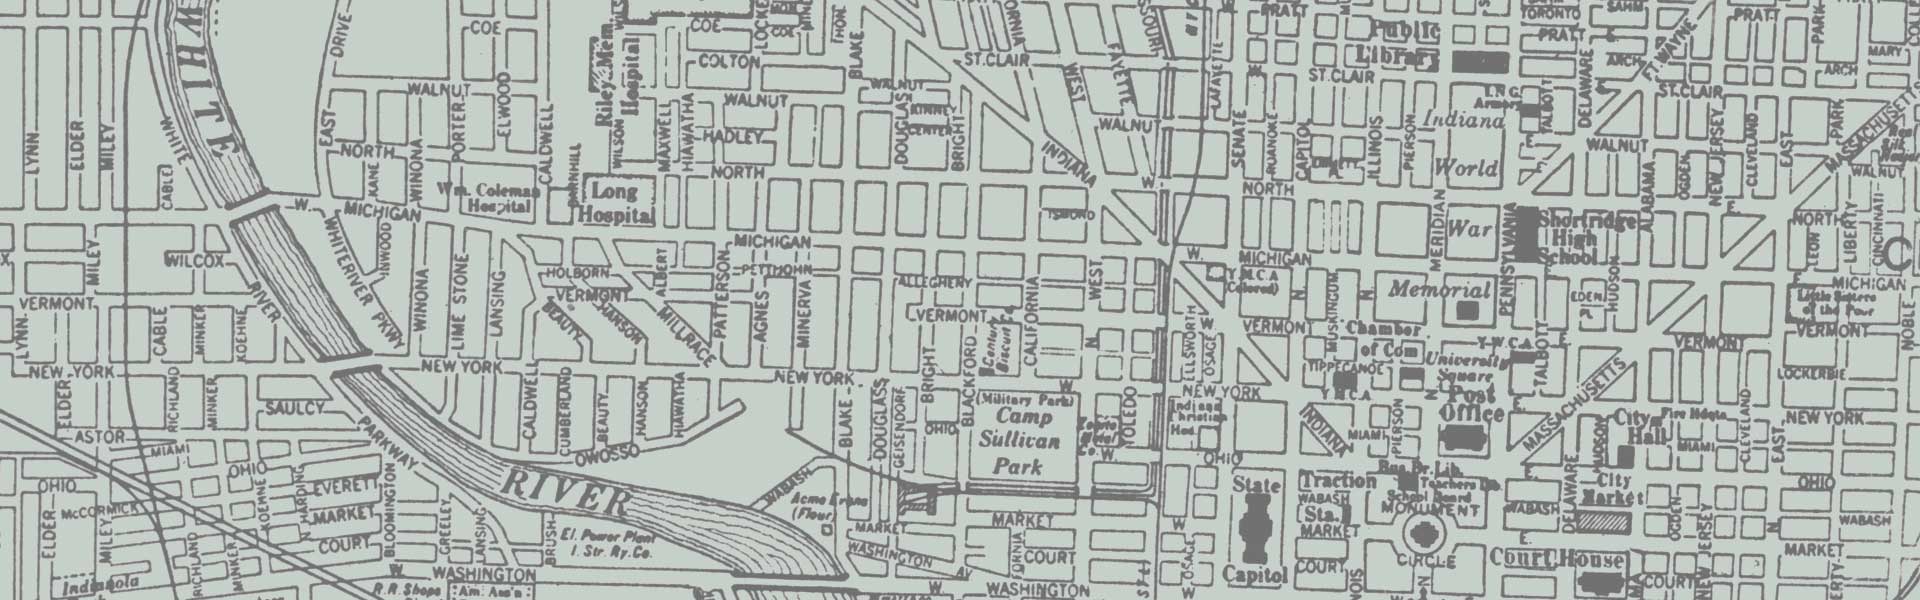 Section of Indianapolis street map.